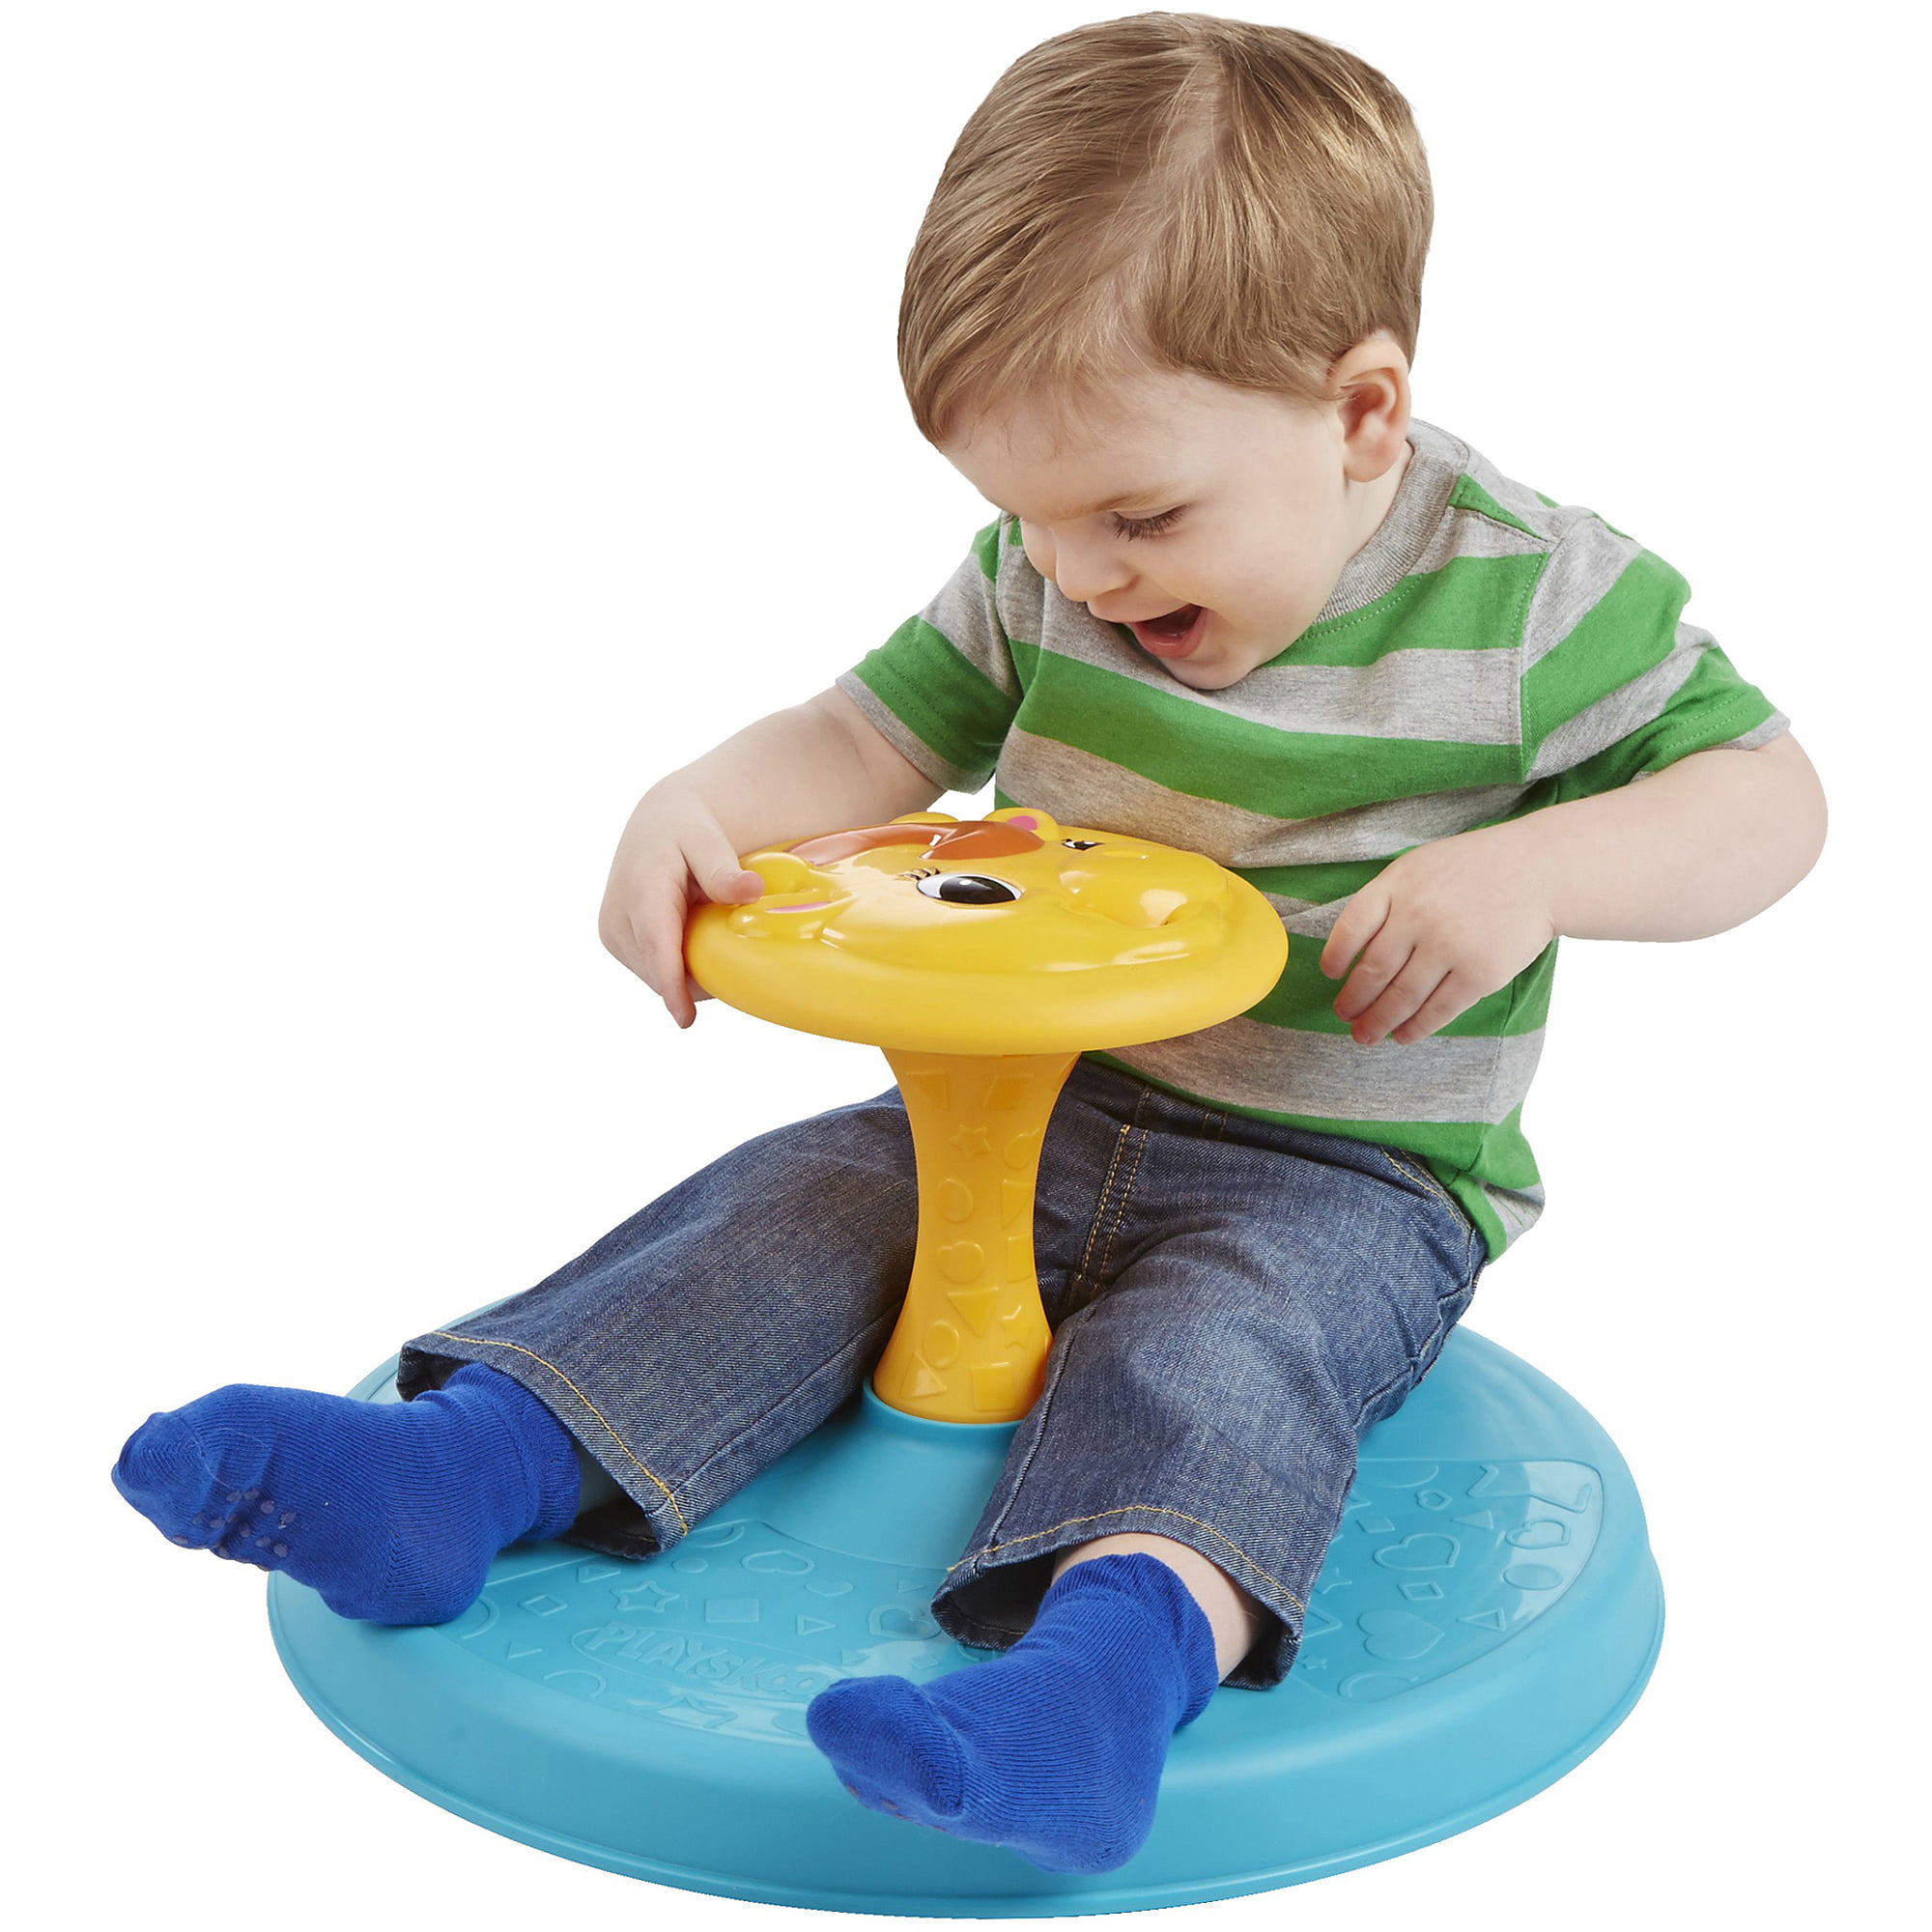 sit and spin toys r us